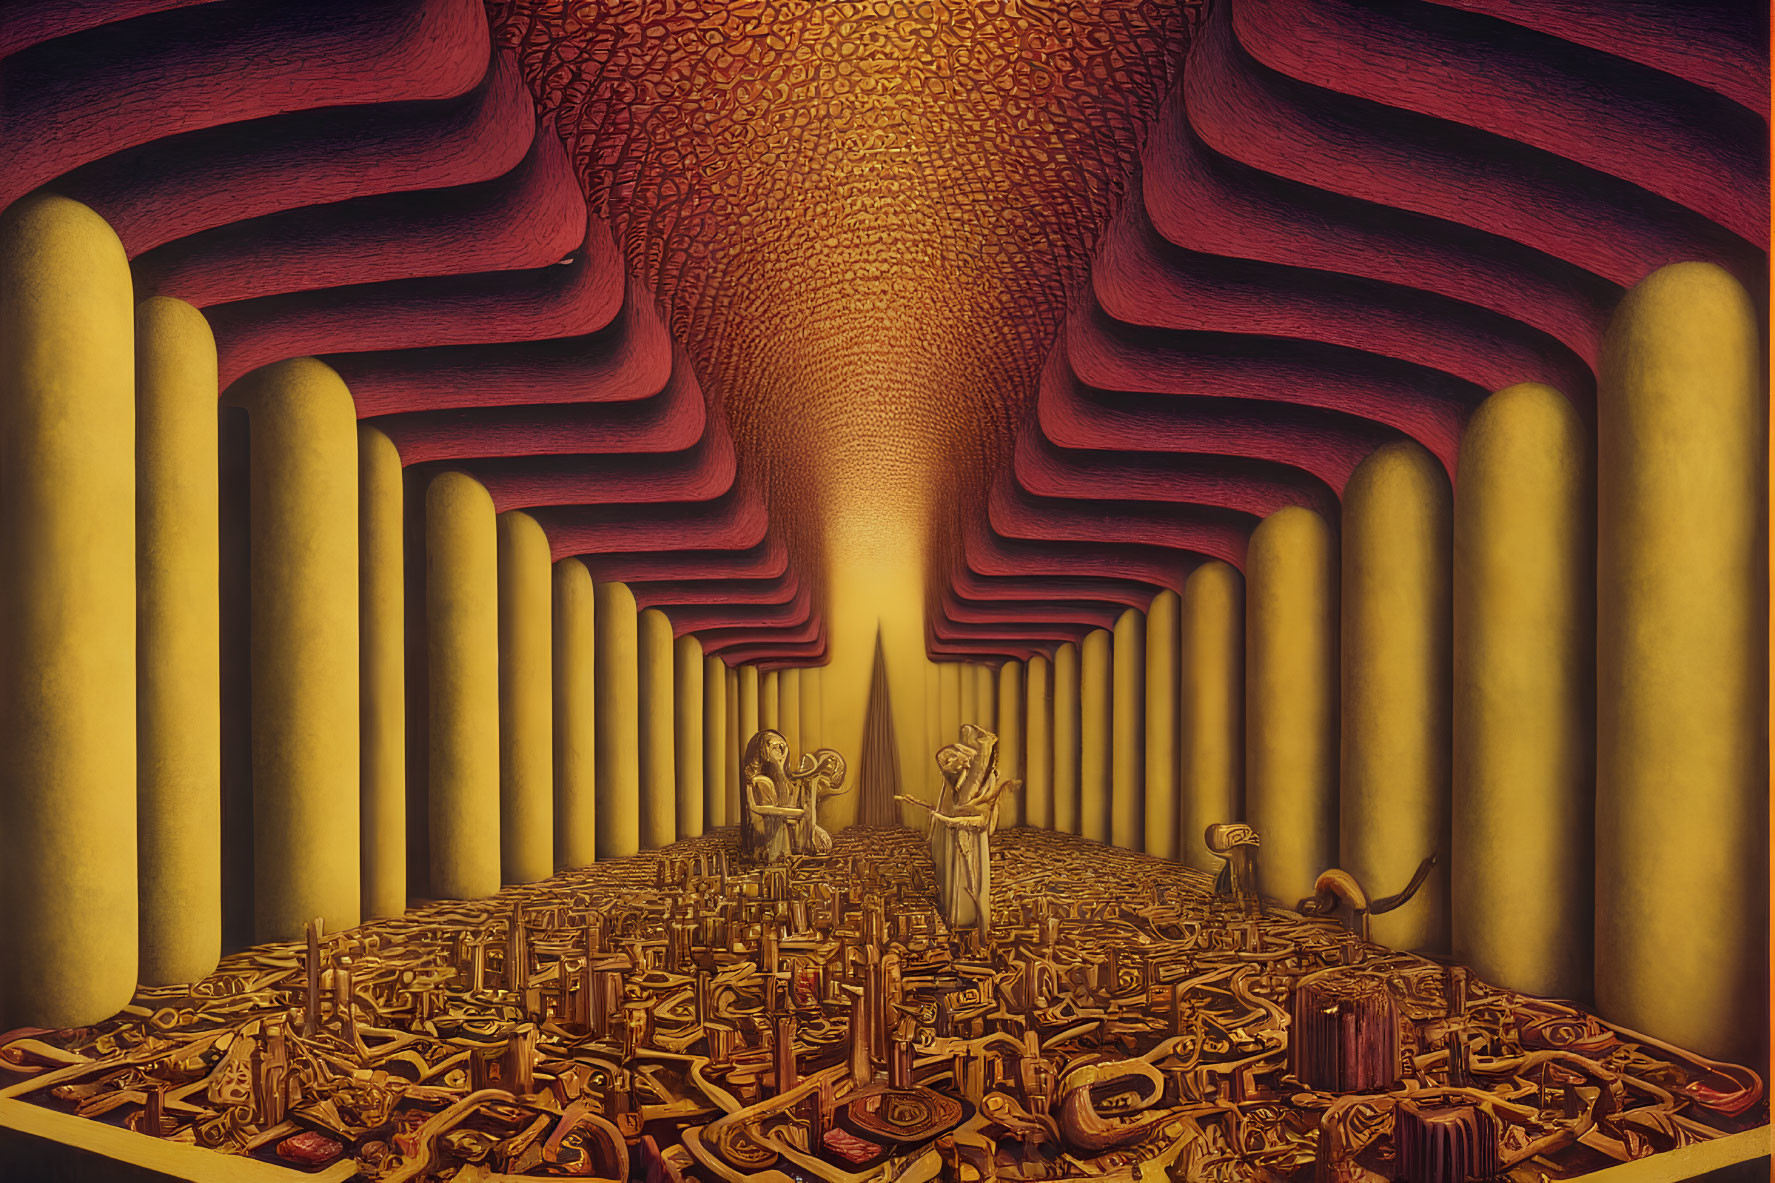 Surreal cavernous space with yellow columns and red ceiling